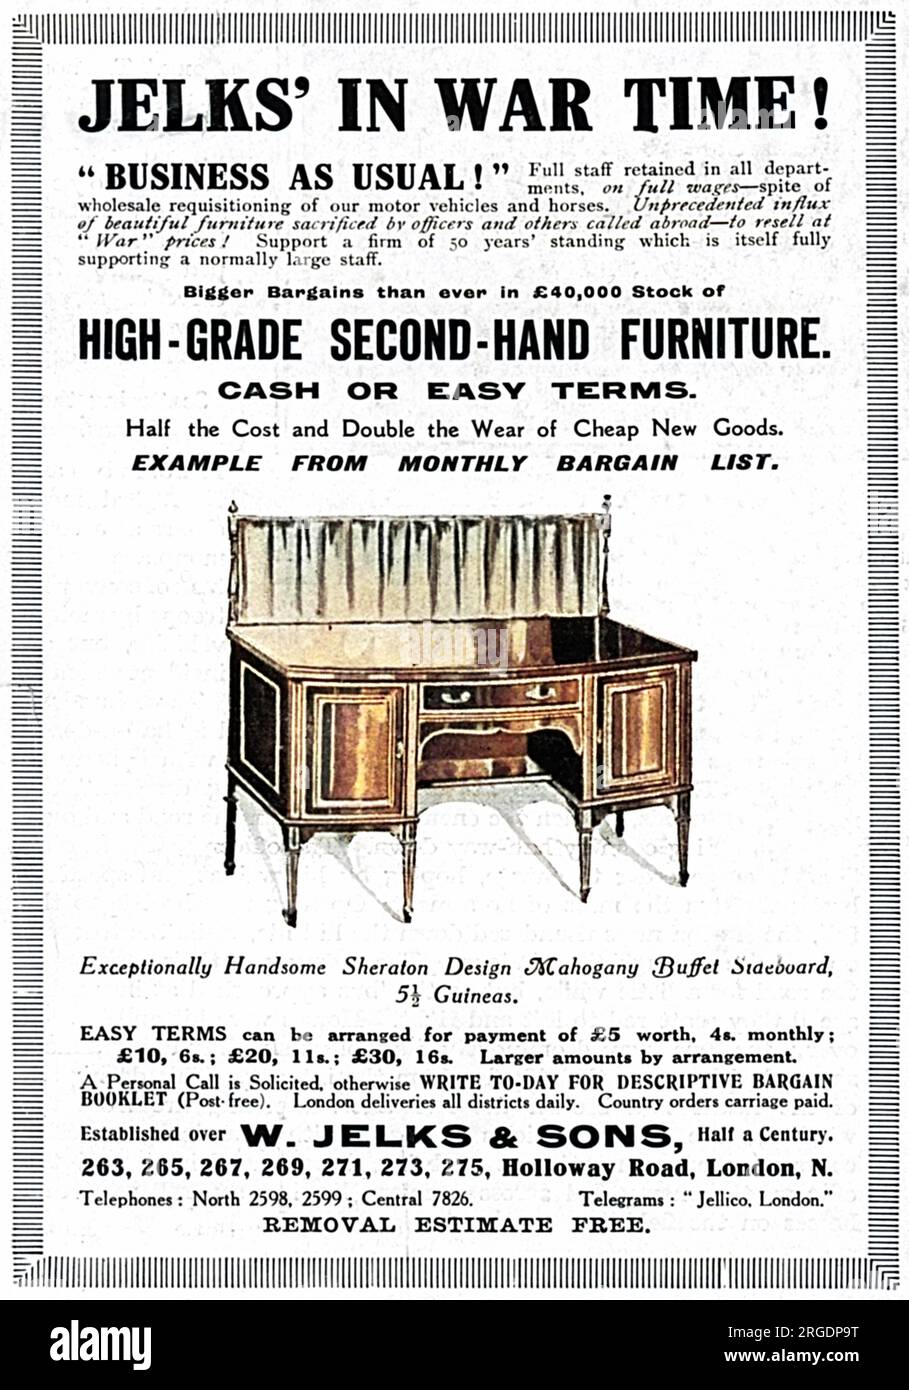 Advertisement for Jelk's, W. Jelks & Sons of Holloway Road, London, with fifty years experience in house removals and second hand furniture.  The advert, which appears in The Sketch magazine at the end of September 1914, proclaims its 'Business as Usual' approach in wartime, advising readers that it was retaining a full staff in all departments on full wages in spite of wholelsale requisitioning of horses and vehicles.  The advert also promotes the fact it has a unprecedented amount of furniture stock due to an influx of pieces from officers and others called abroad.  Pictured is a handsome Sh Stock Photo